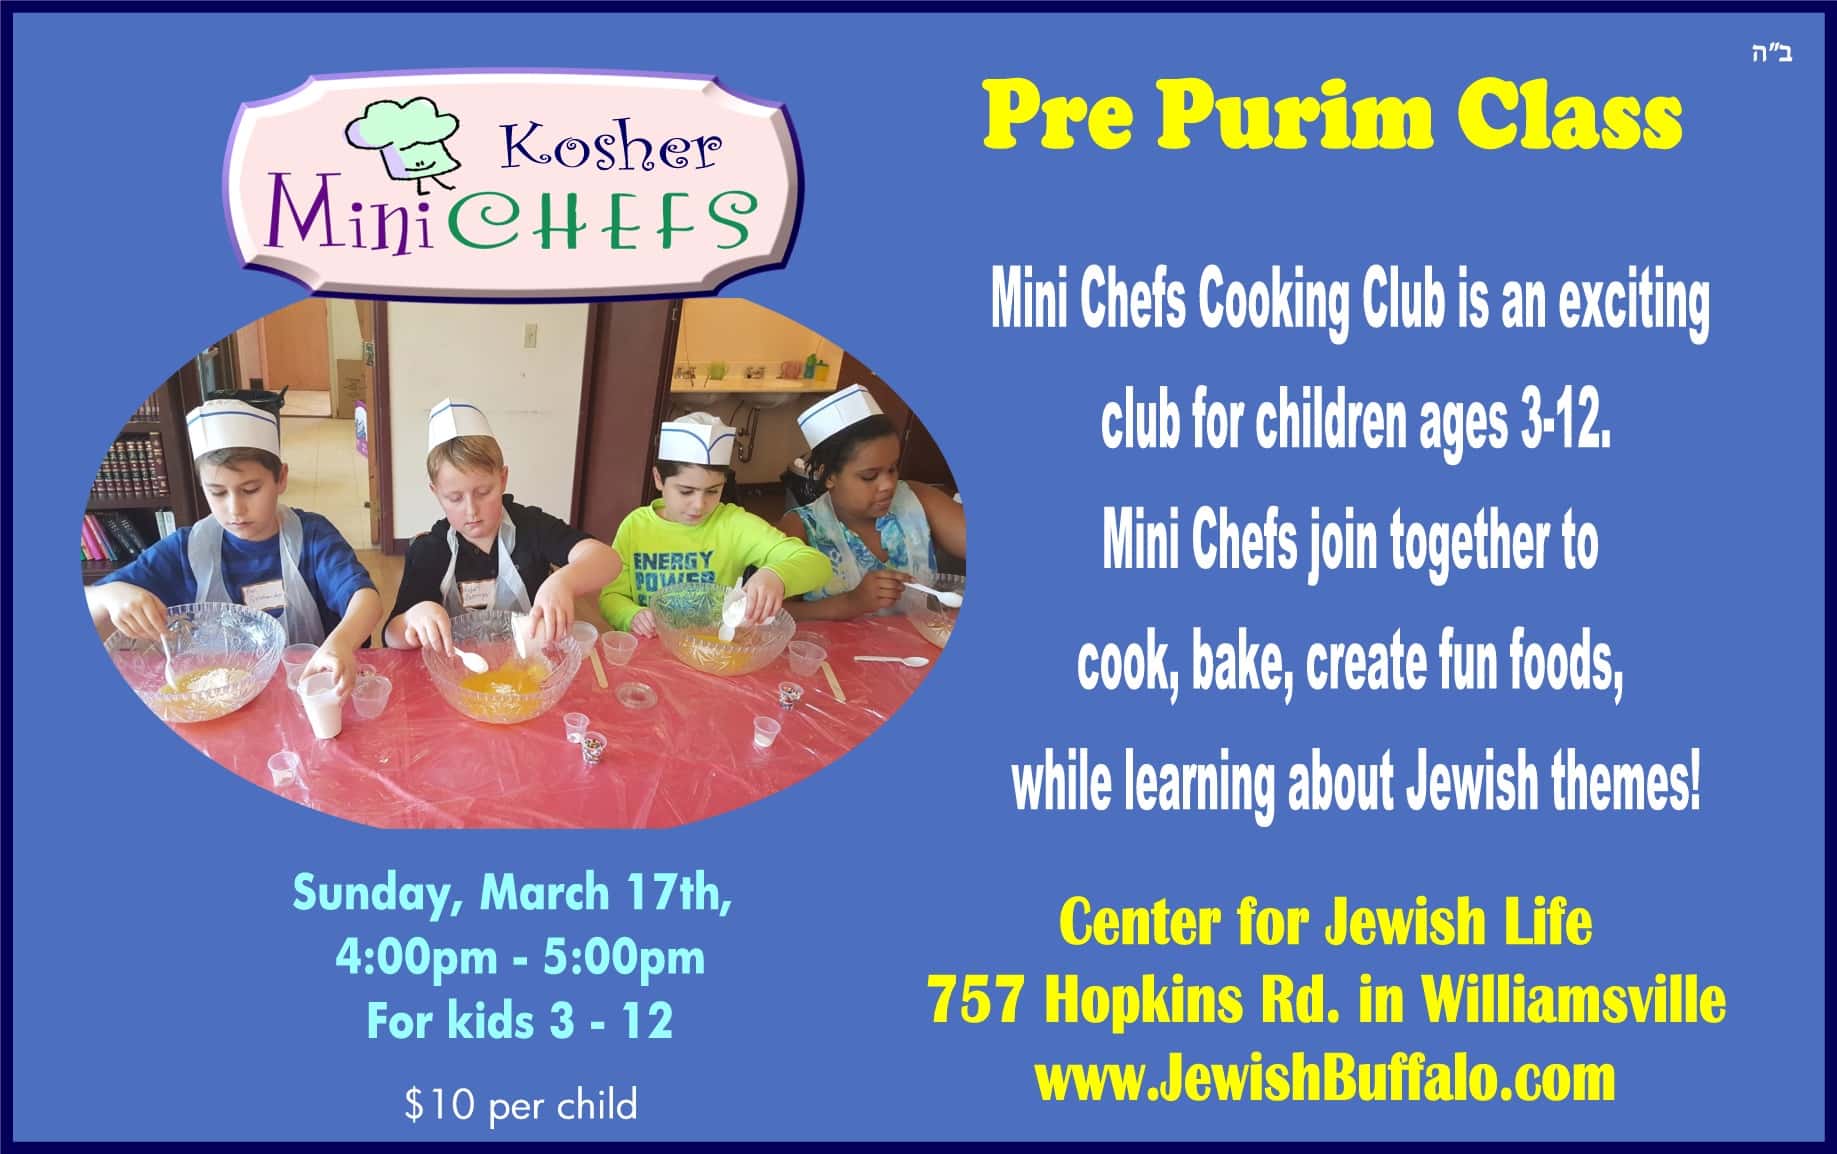 Holiday Kosher Mini Chefs - pre purim cooking class